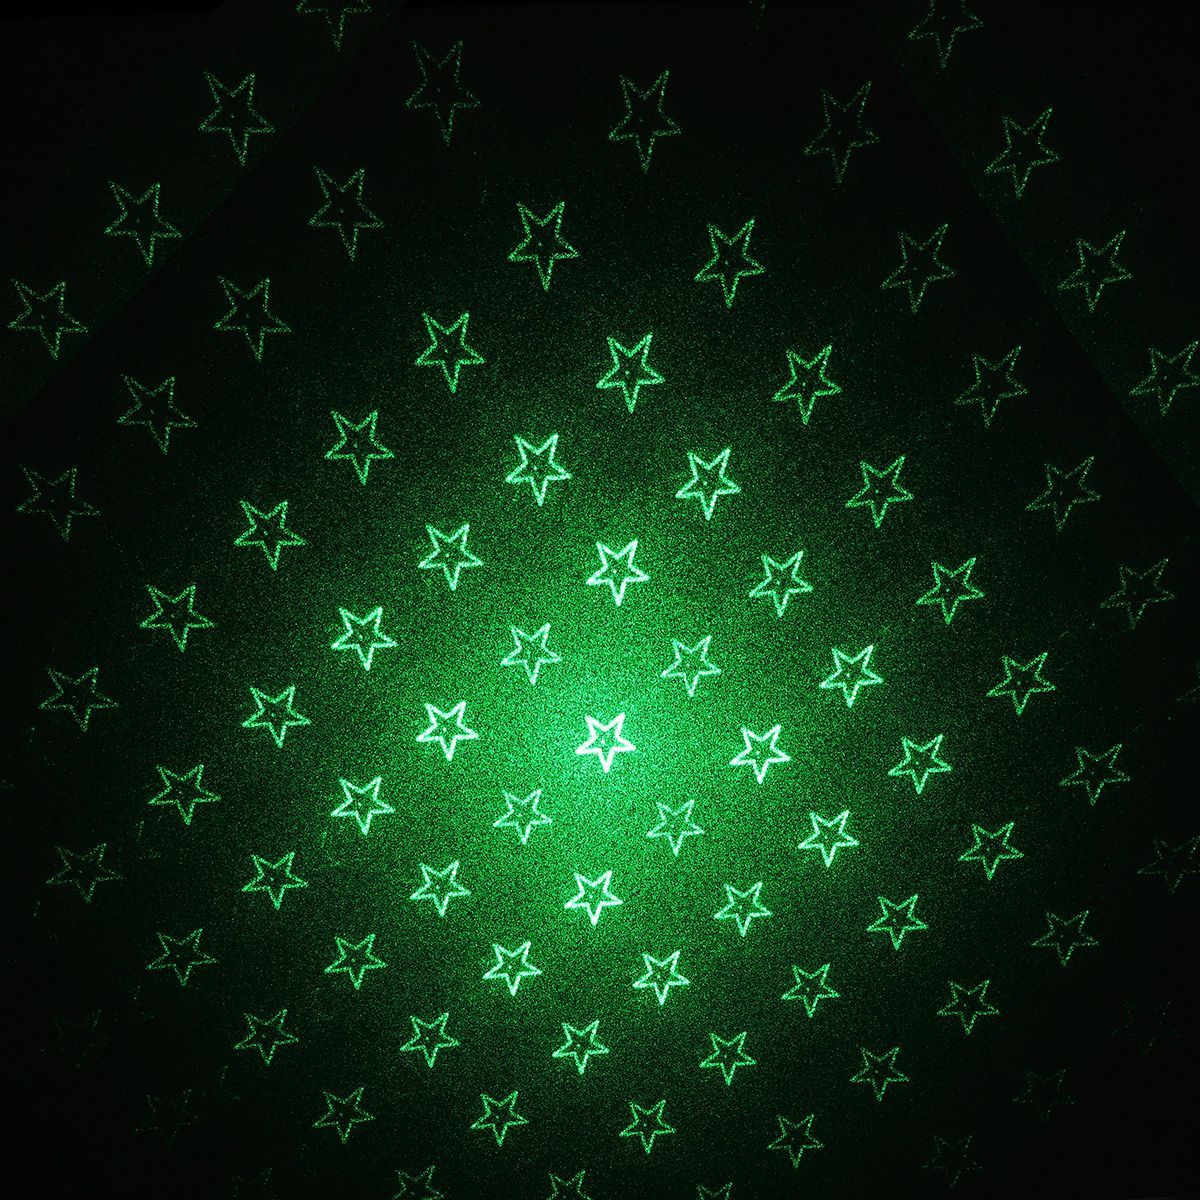 USB-Car-Roof-GypsophilaFive-pointed-Star-LED-Night-Light-Romantic-Interior-Atmosphere-Ceiling-Lamp-1732673